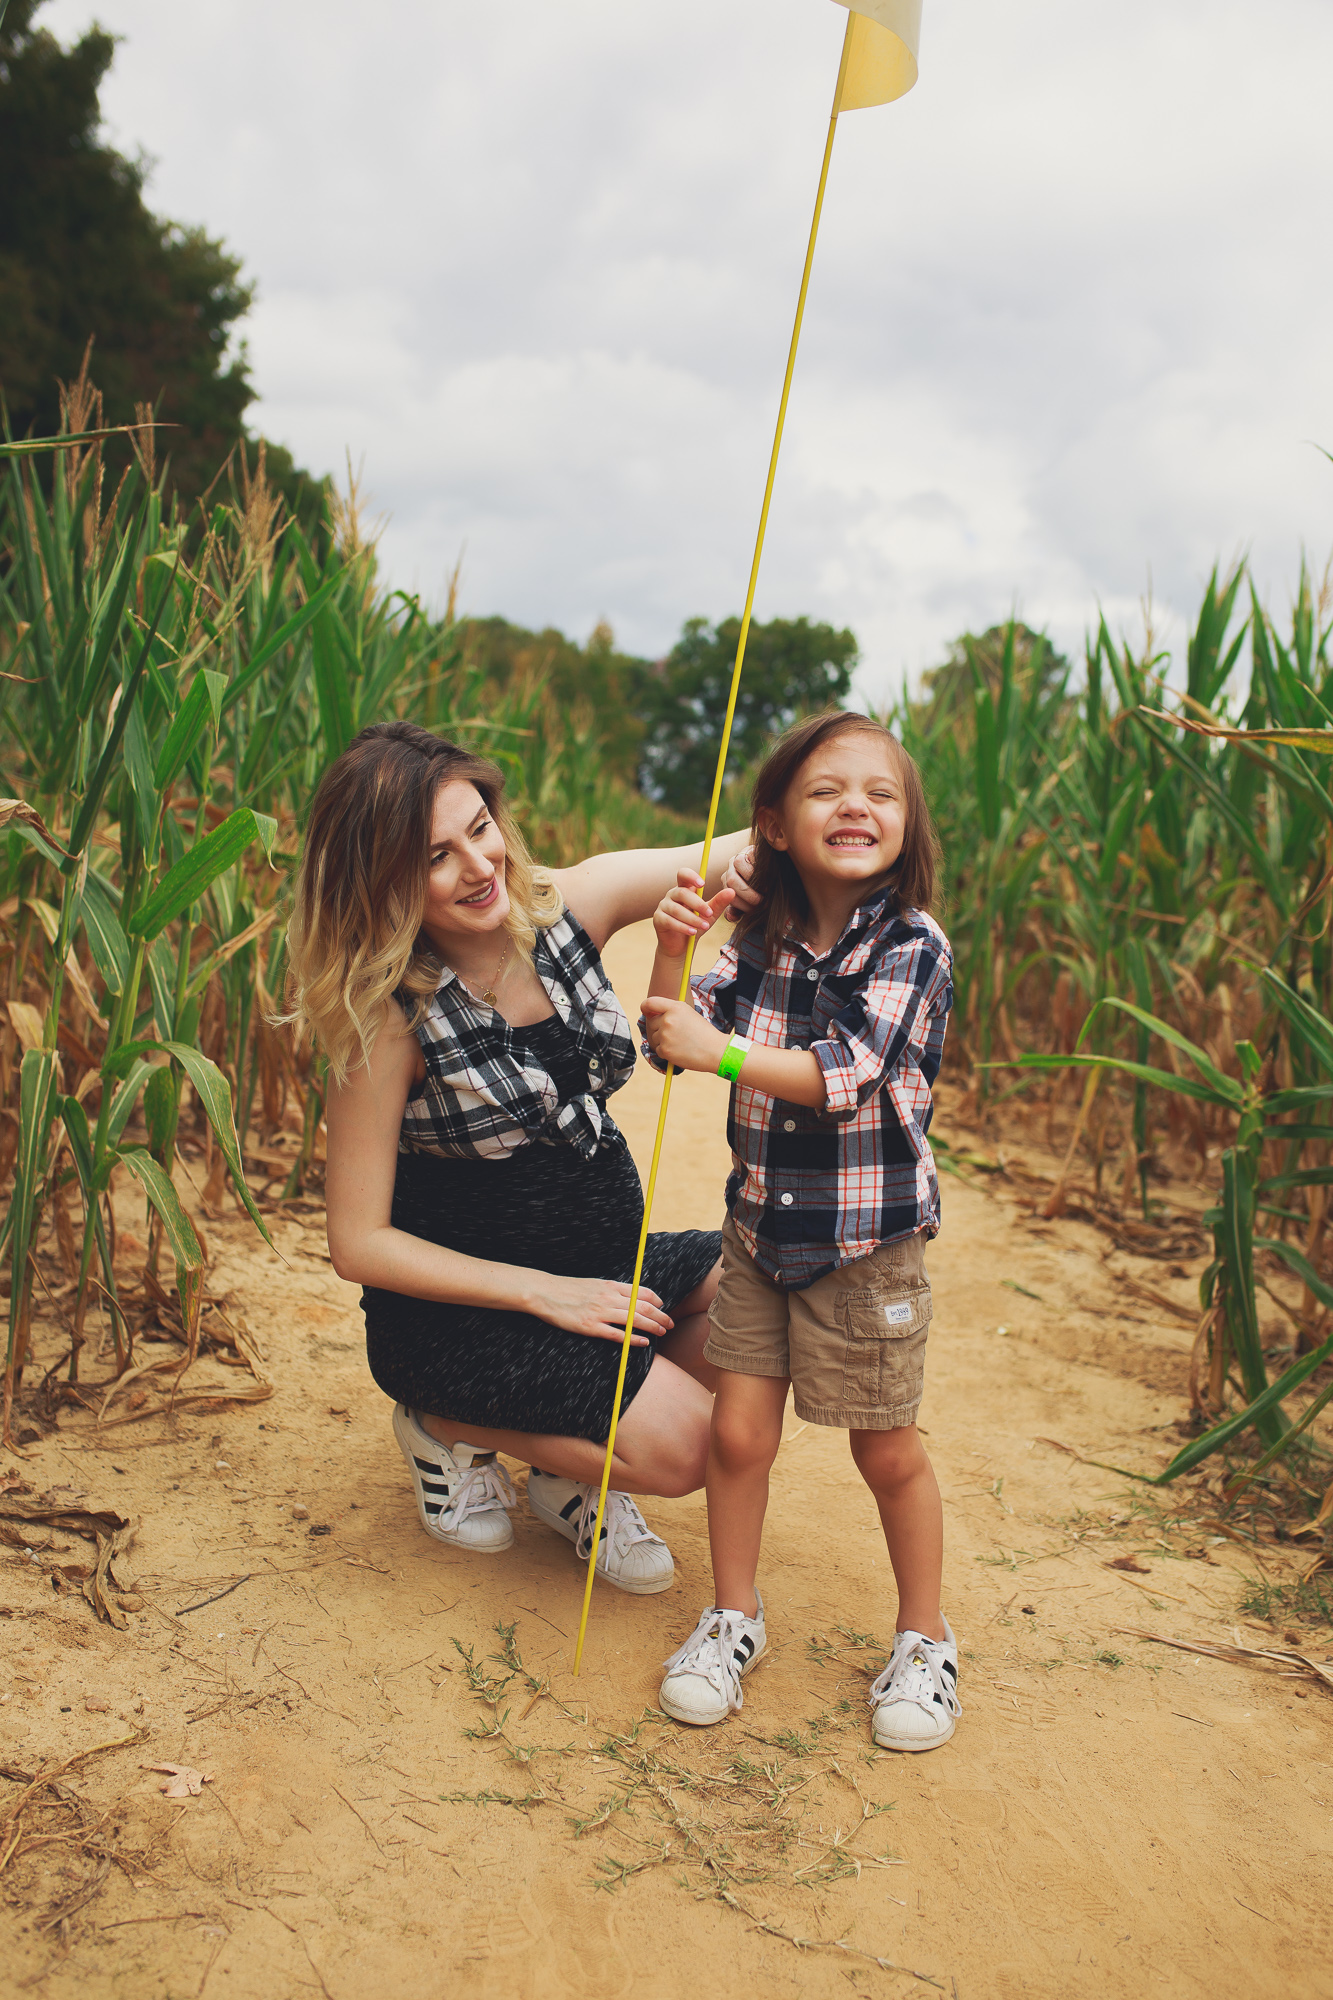 Lifestyle and fashion blogger Jessica Linn from Linn Style | Lifestyle post at Phillips farm in Cary North Carolina. Wearing a maternity dress from Target, flannel and Adidas. Fall Activities